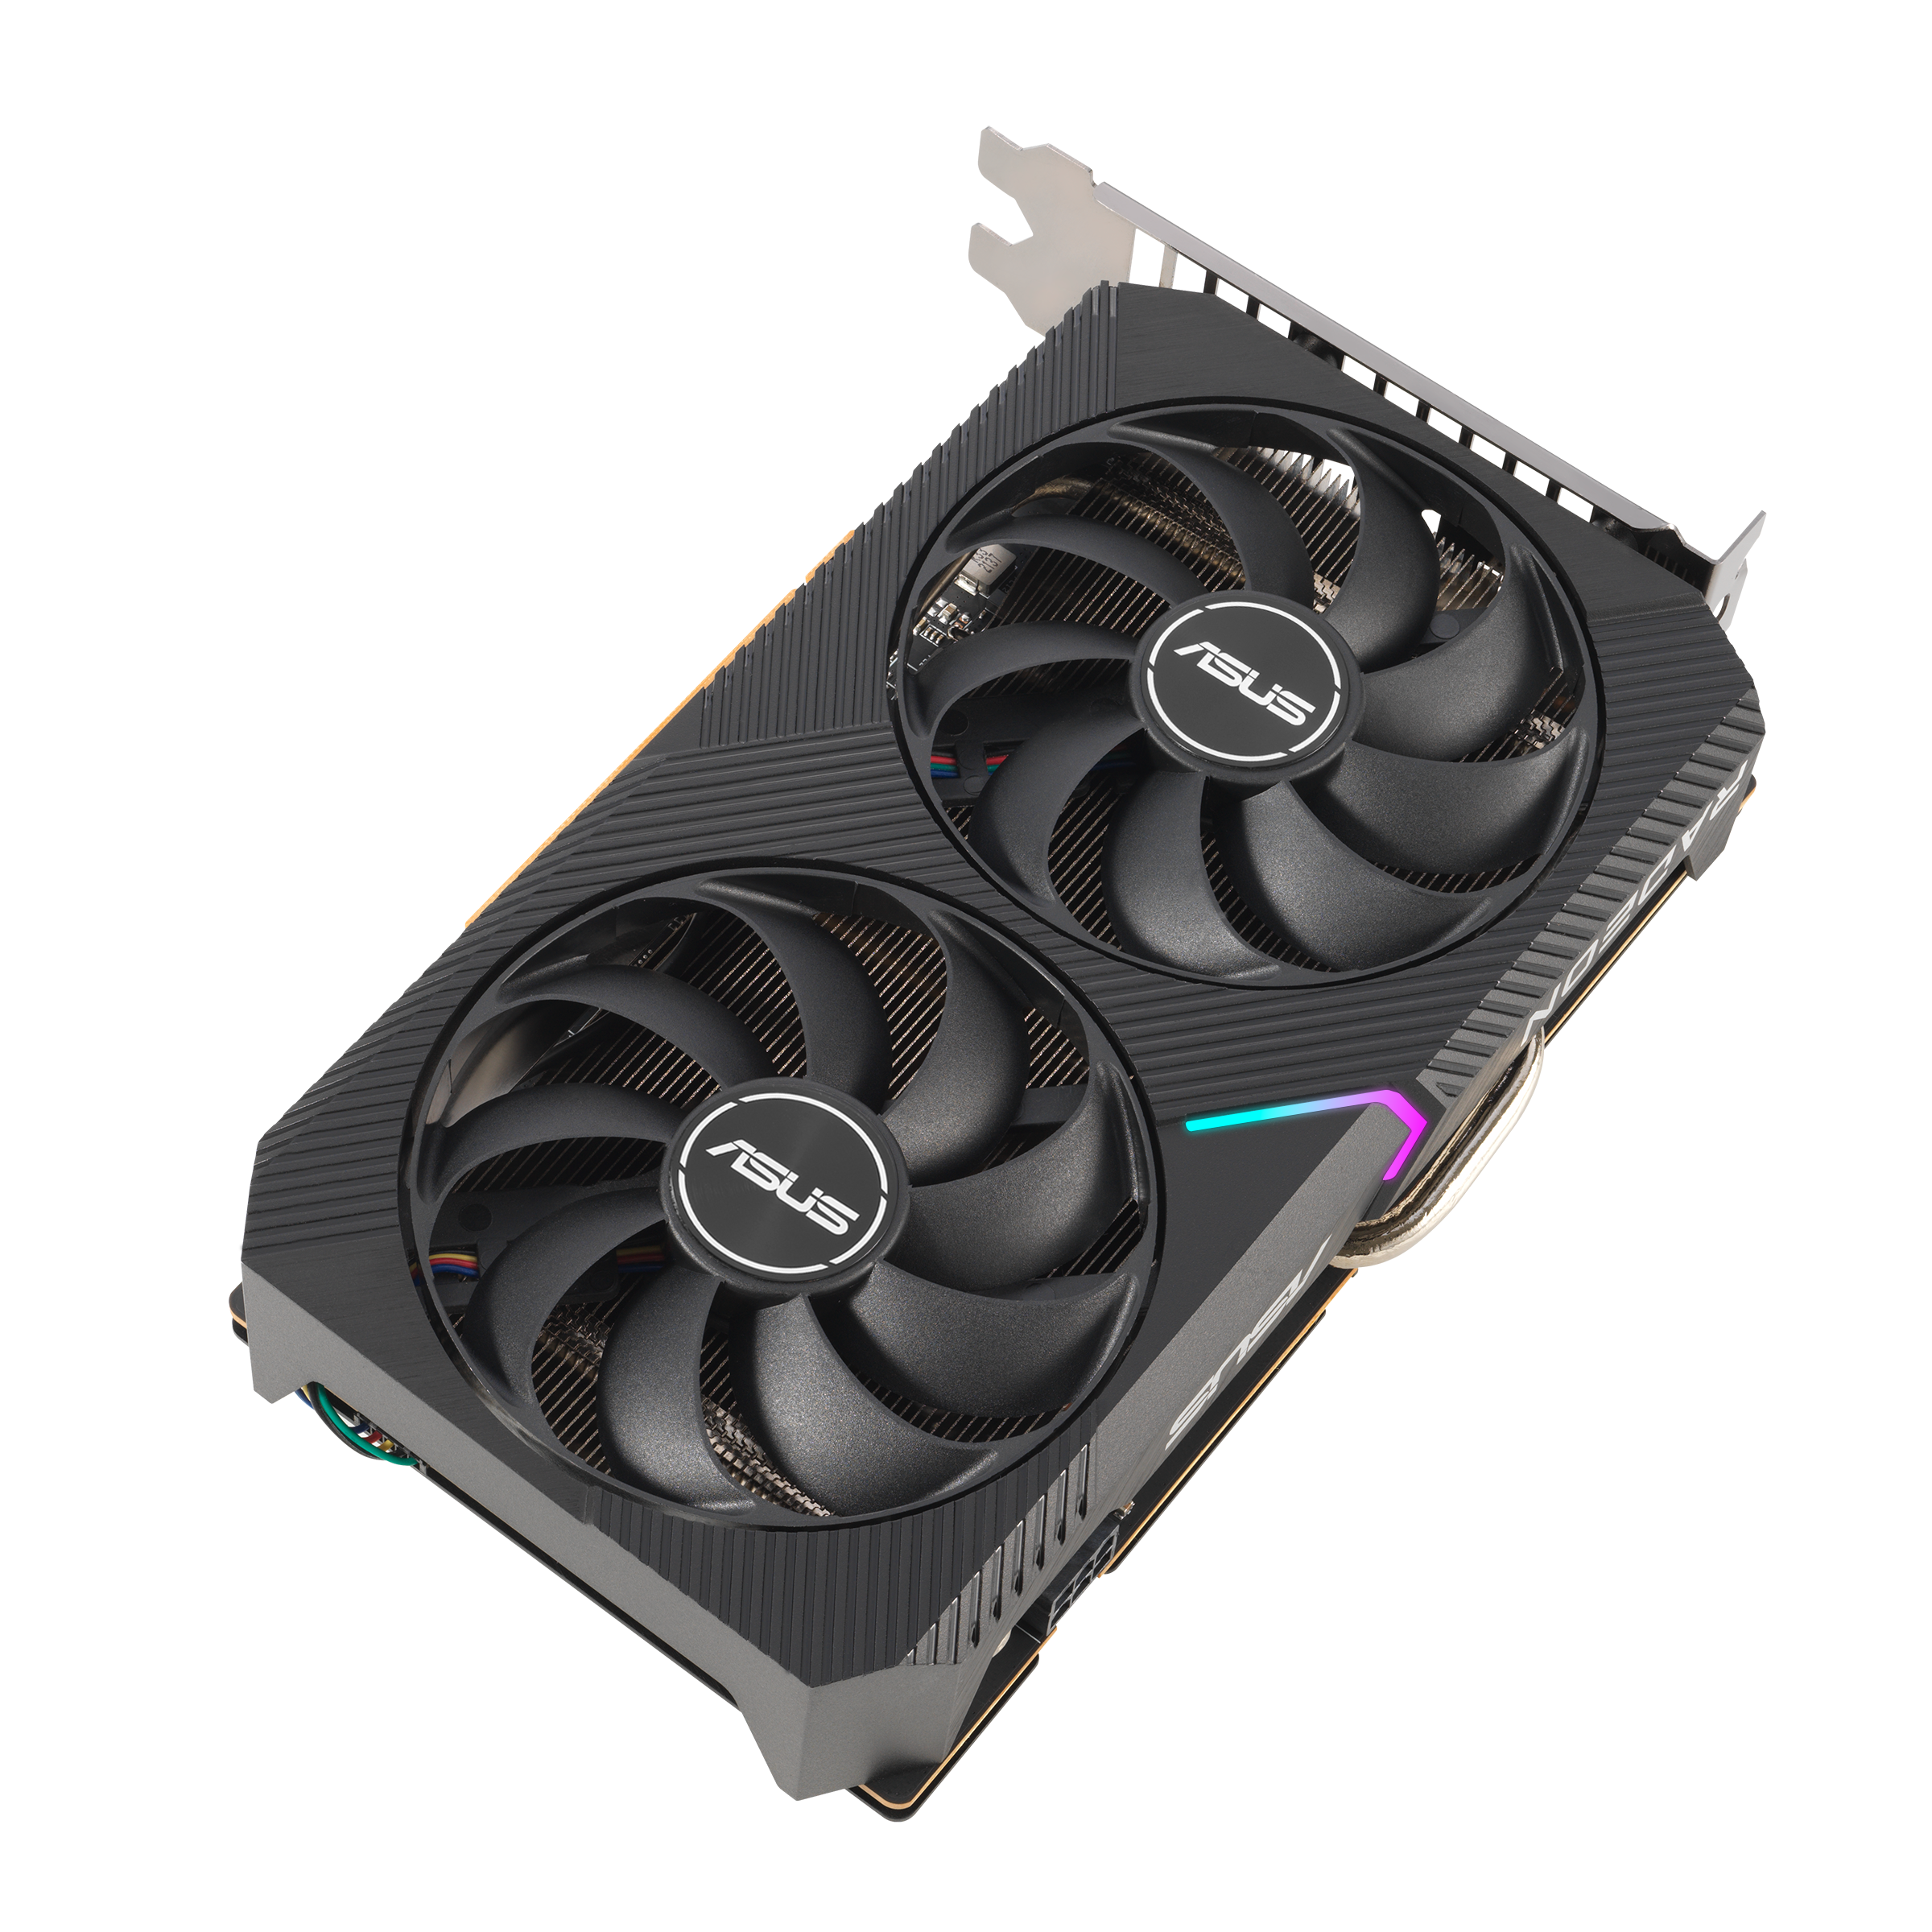 ASUS Radeon Dual RX 6500 XT OC review: A solid card let down by a